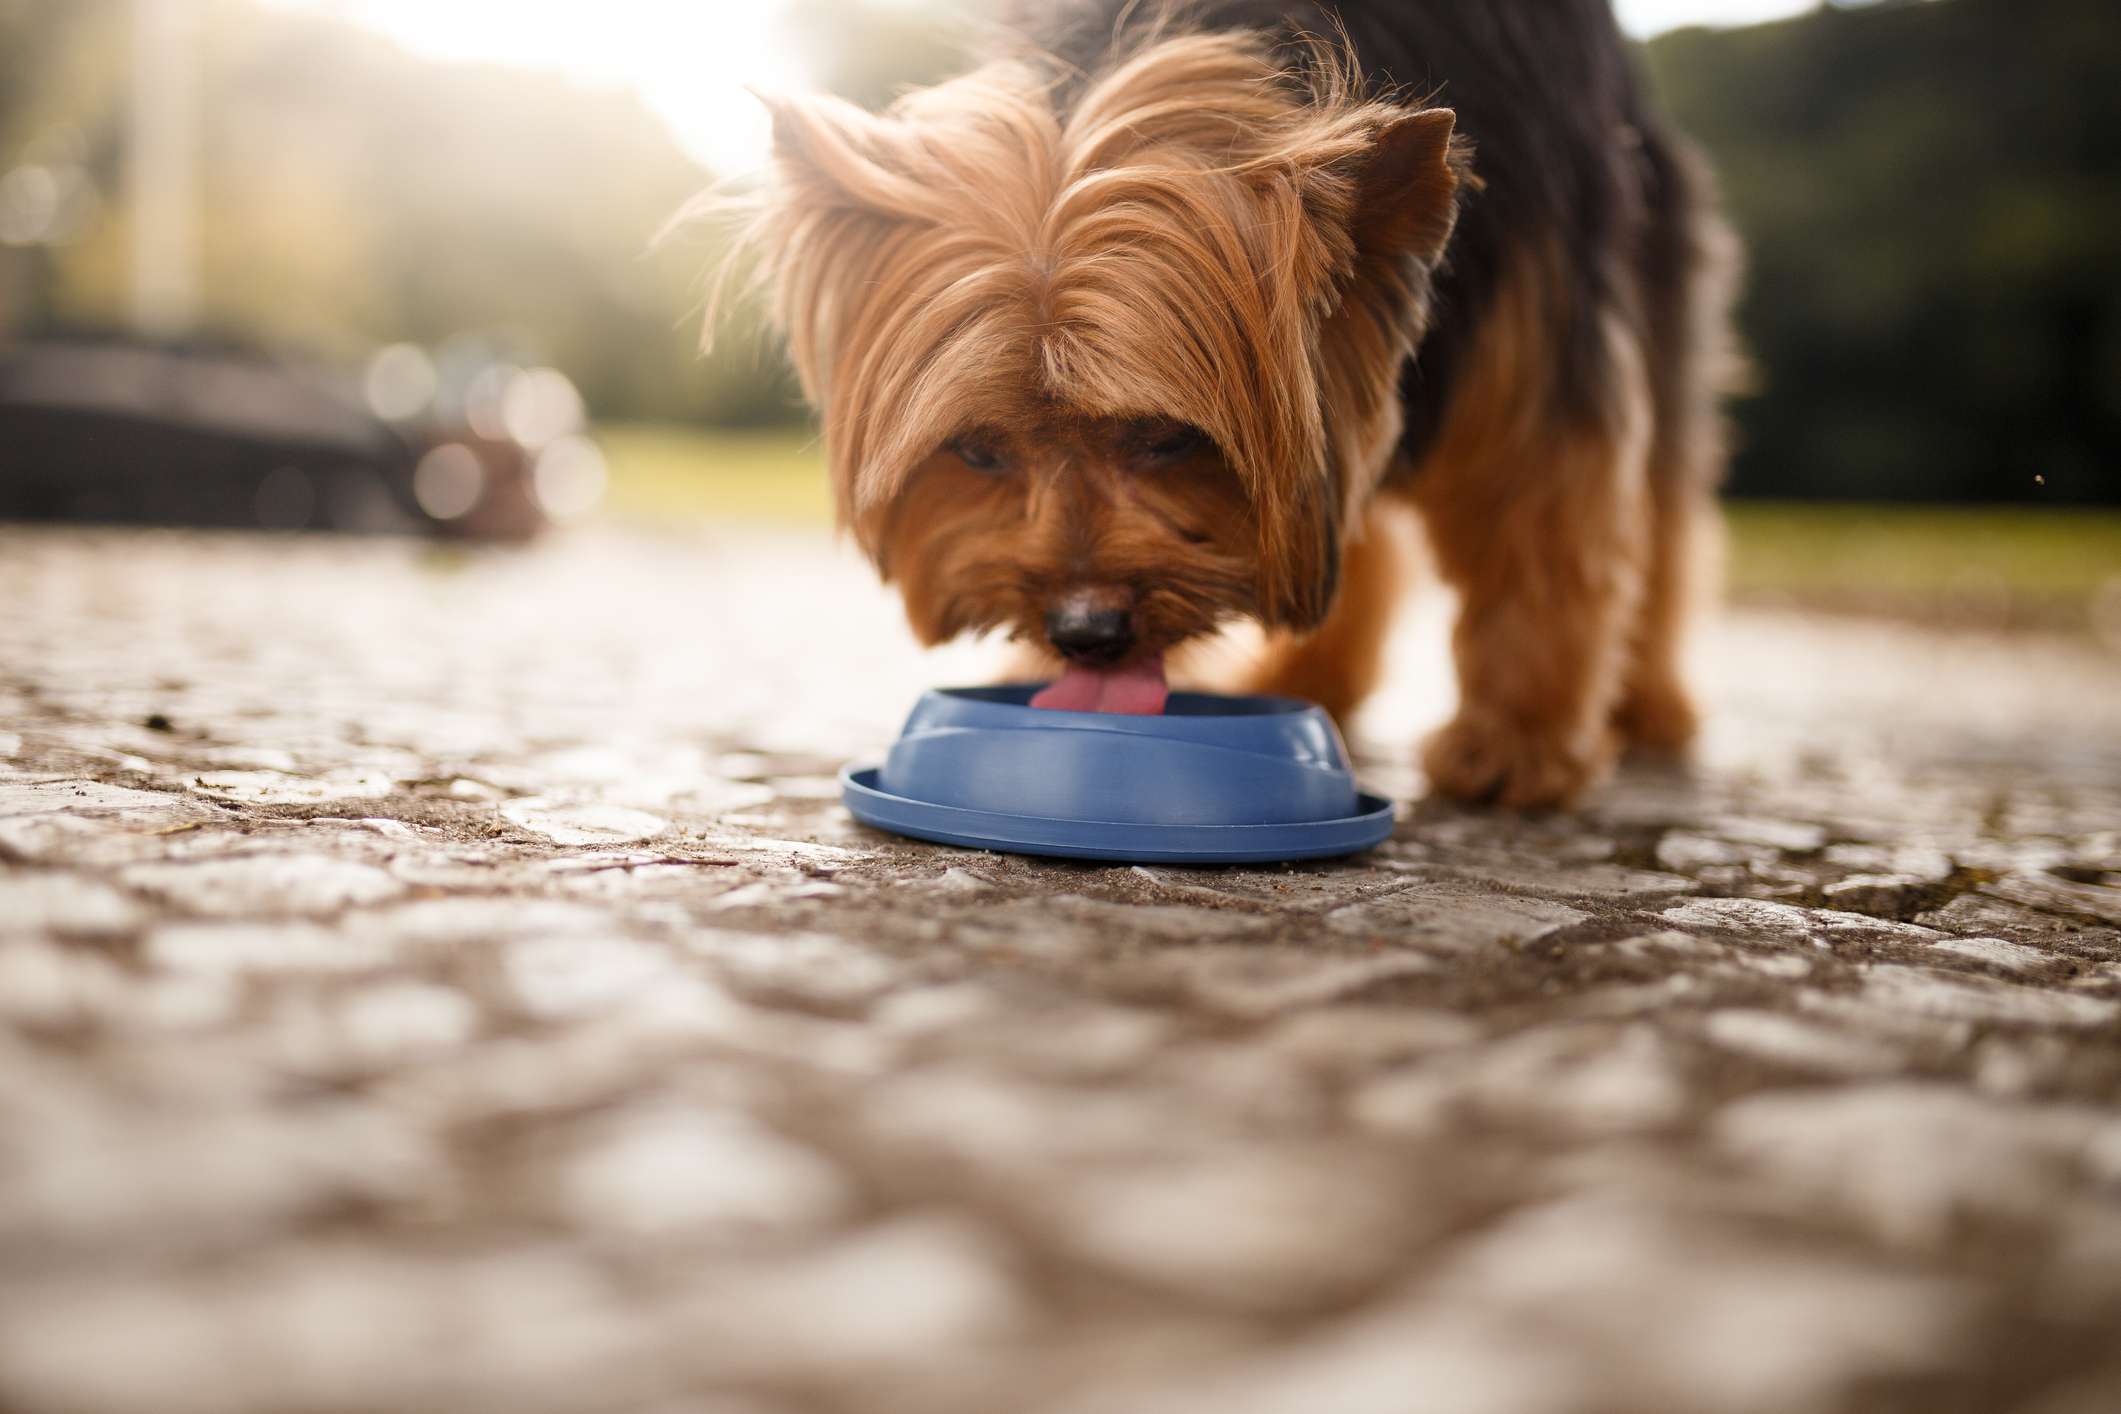 Dog drinking water out of a blue dish on the floor.